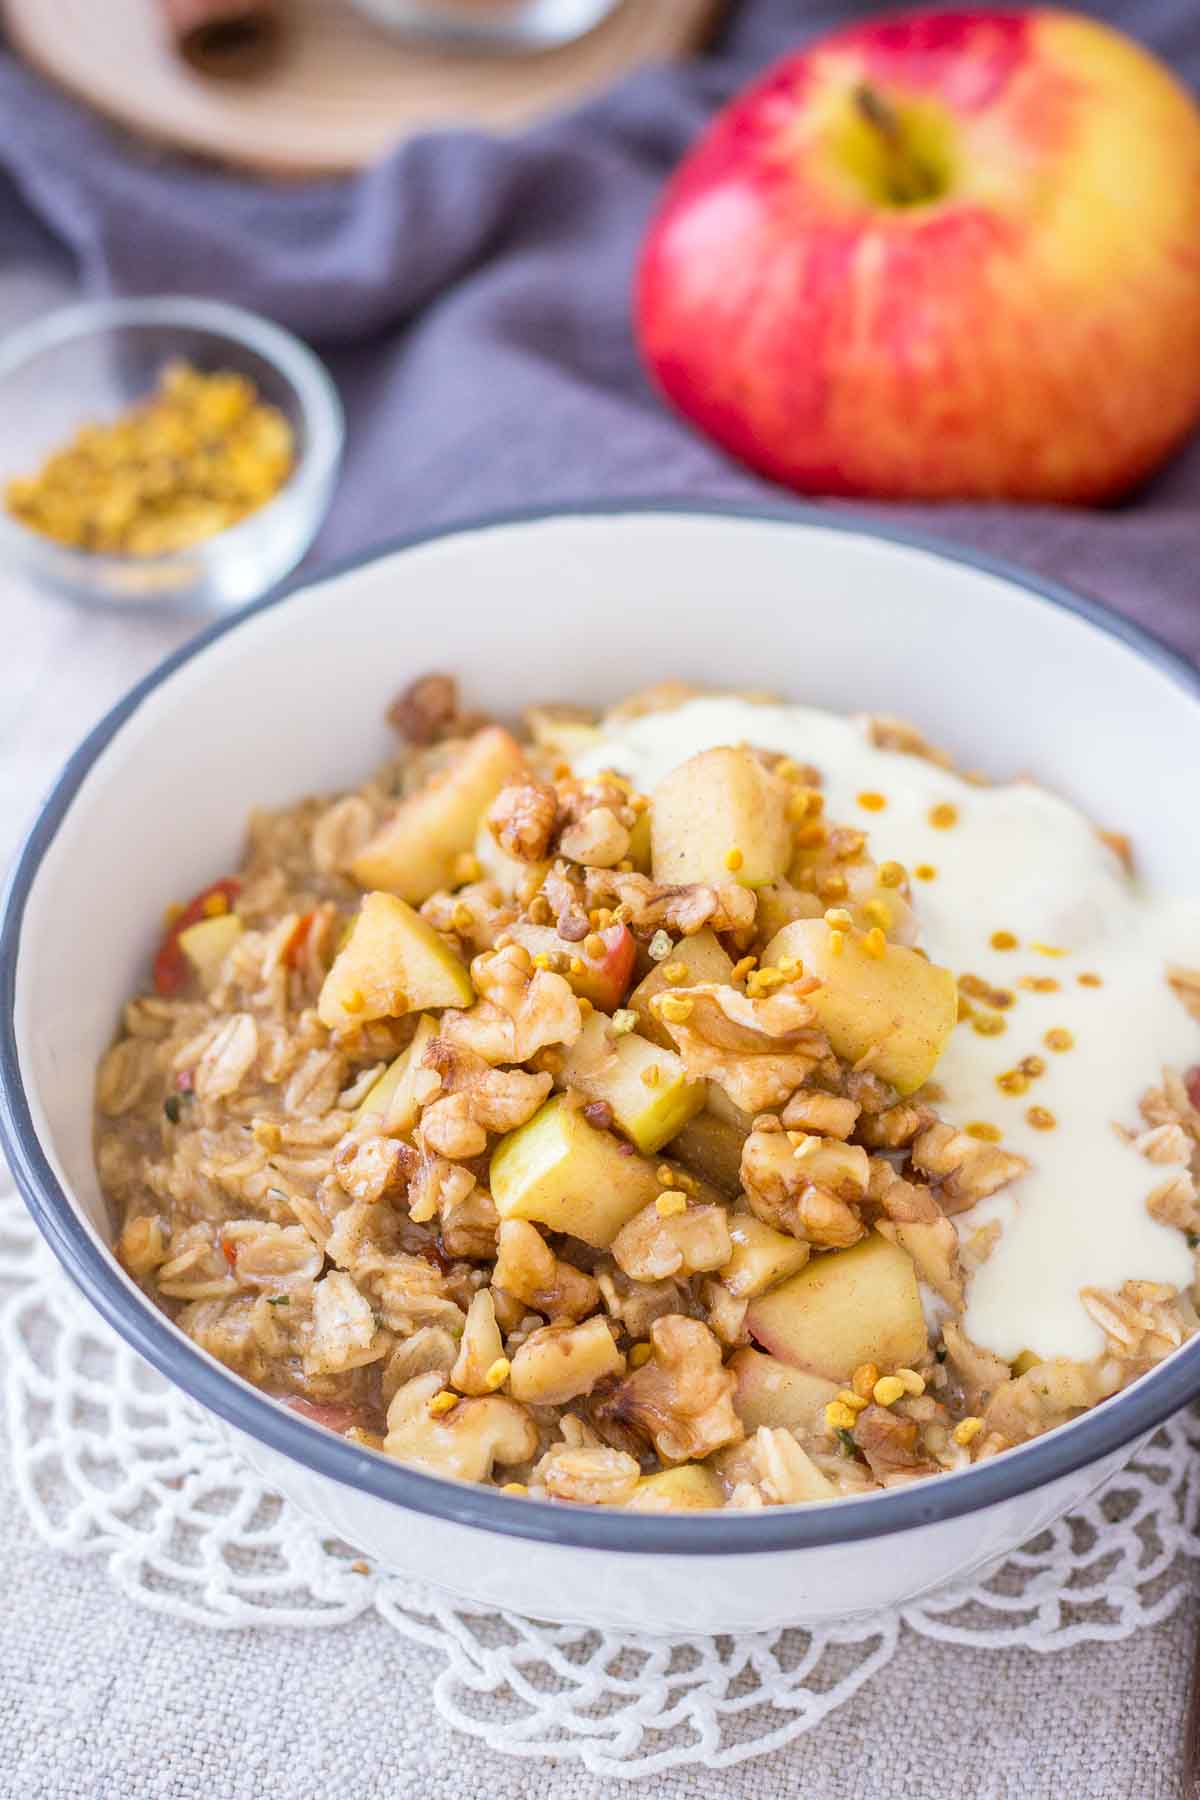 Apple Cinnamon Oatmeal served in a bowl topped with diced apples, walnuts and yogurt